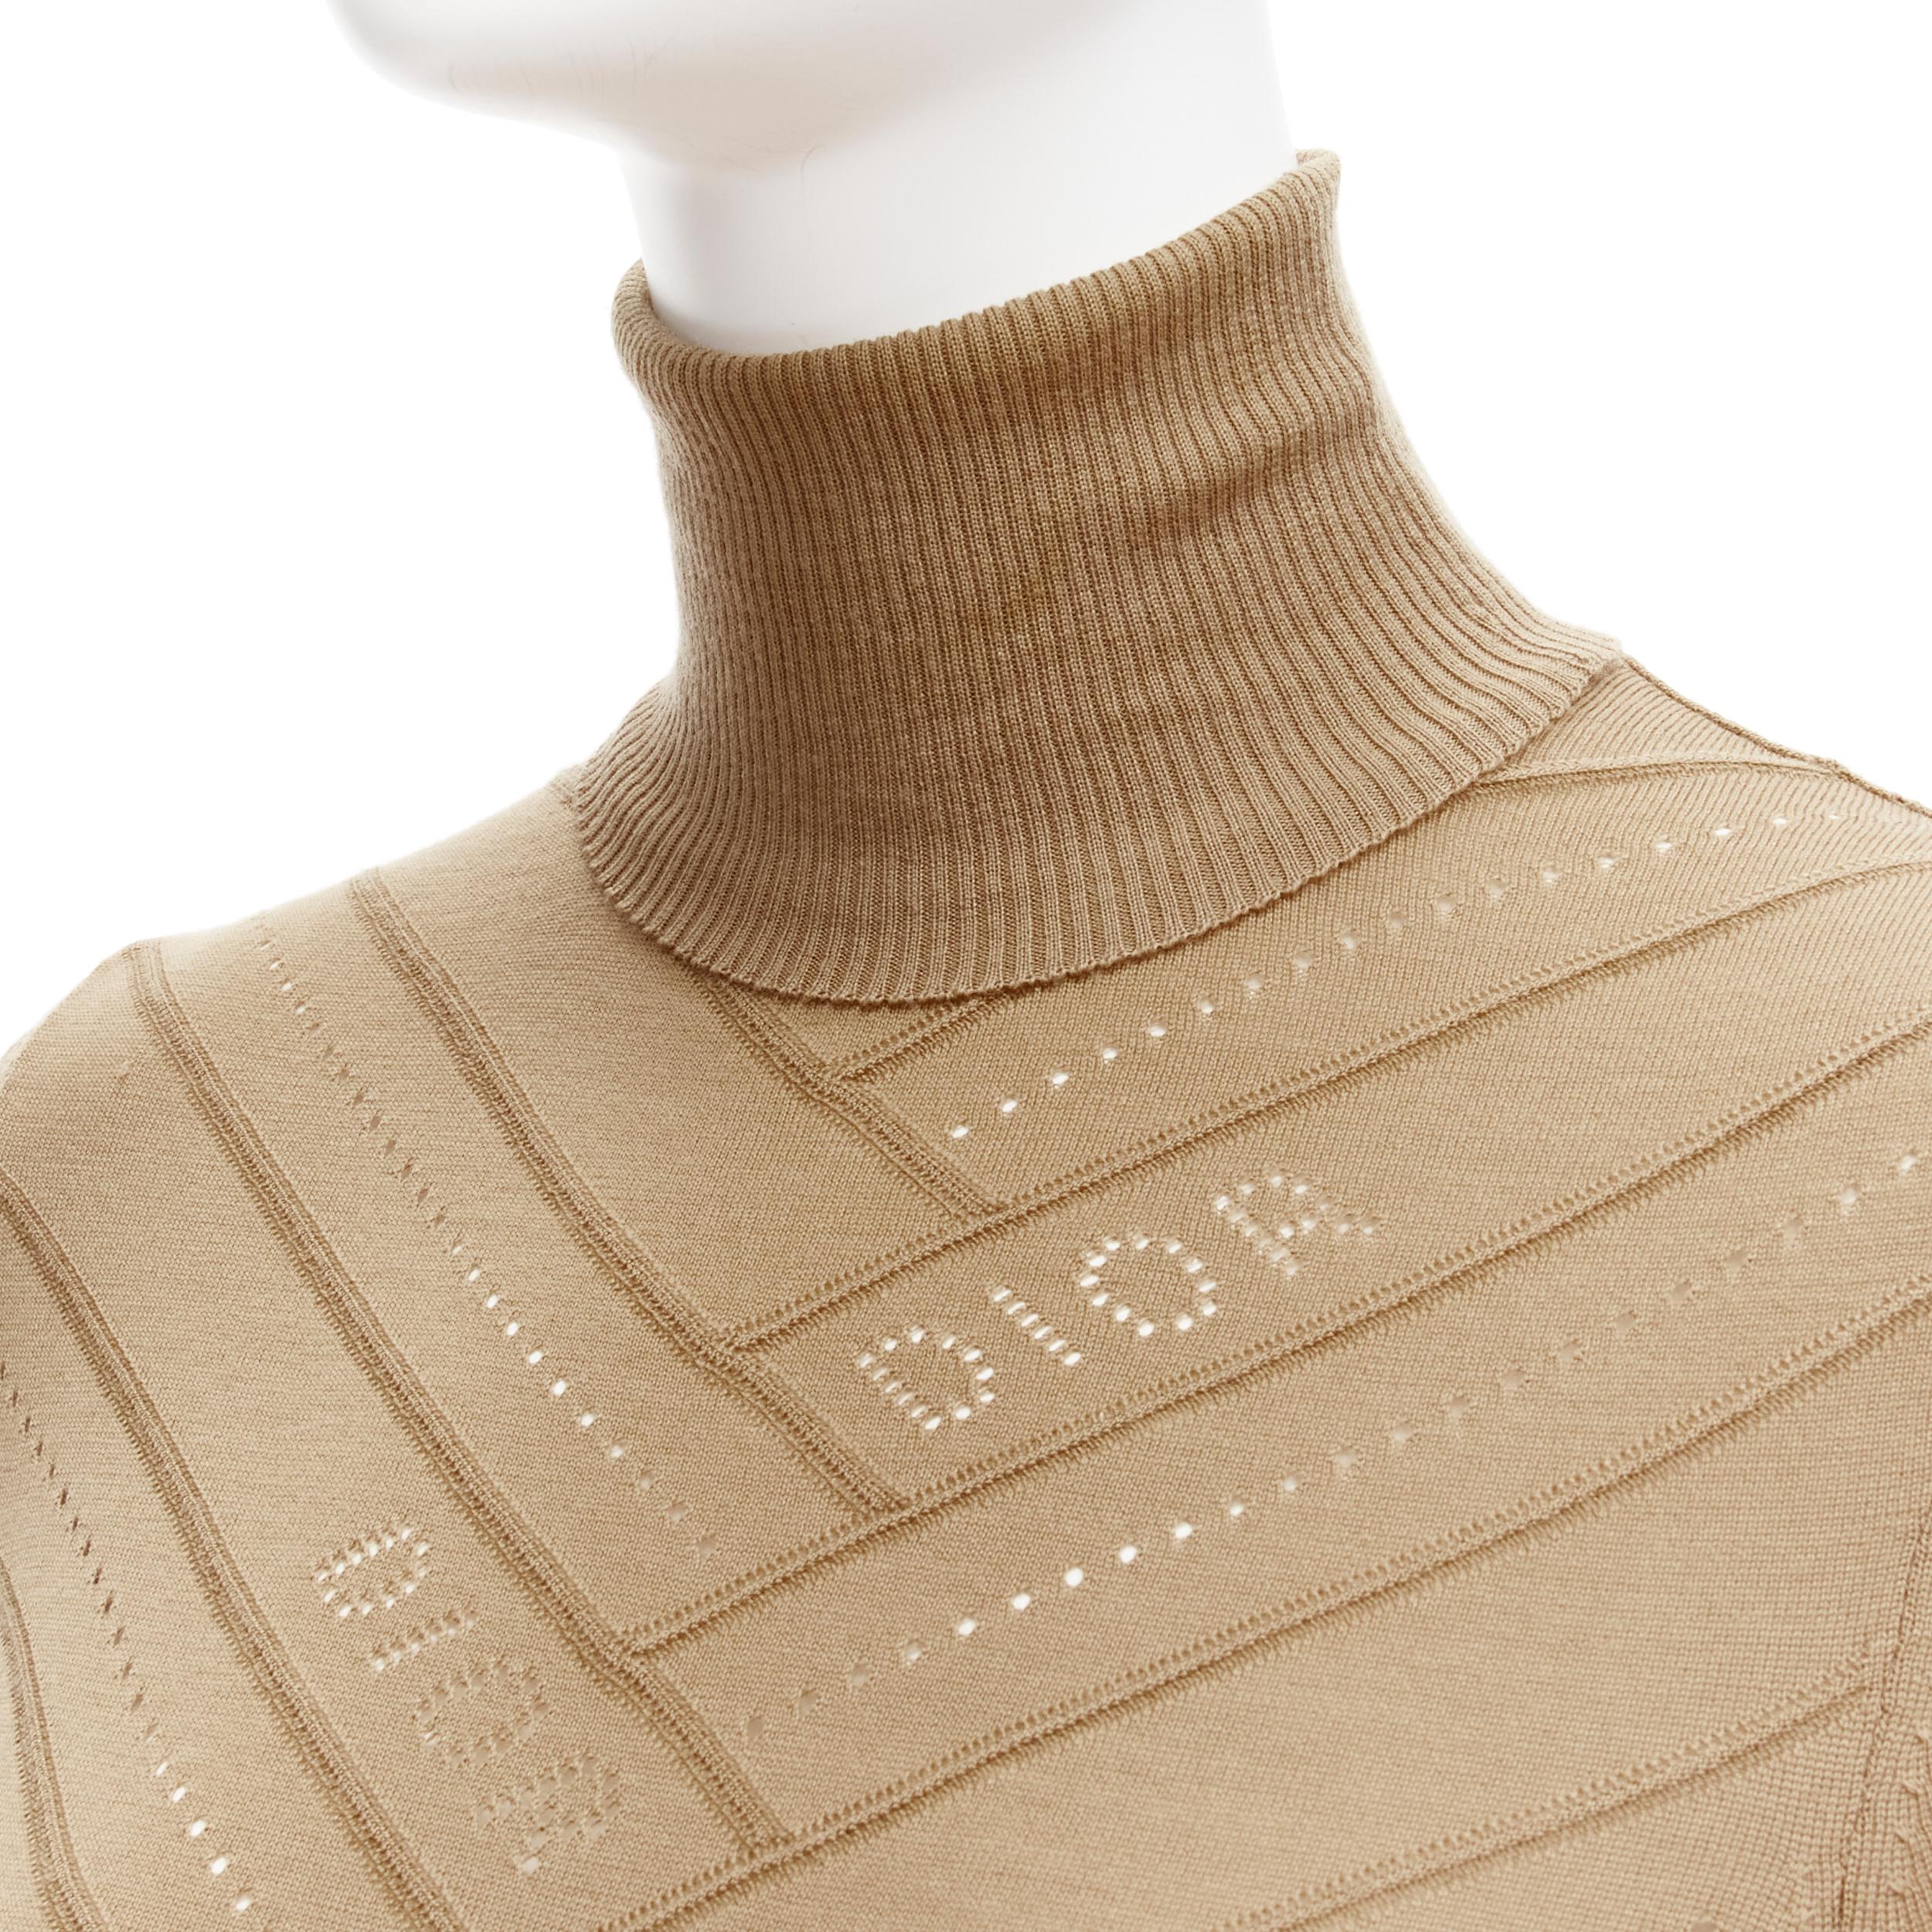 CHRISTIAN DIOR Vintage Galliano brown Dior logo Pointelle knit turtleneck sweater FR36 S
Reference: TGAS/D00254
Brand: Christian Dior
Designer: John Galliano
Material: Wool
Color: Beige
Pattern: Logomania
Closure: Pullover
Extra Details: Dior logo